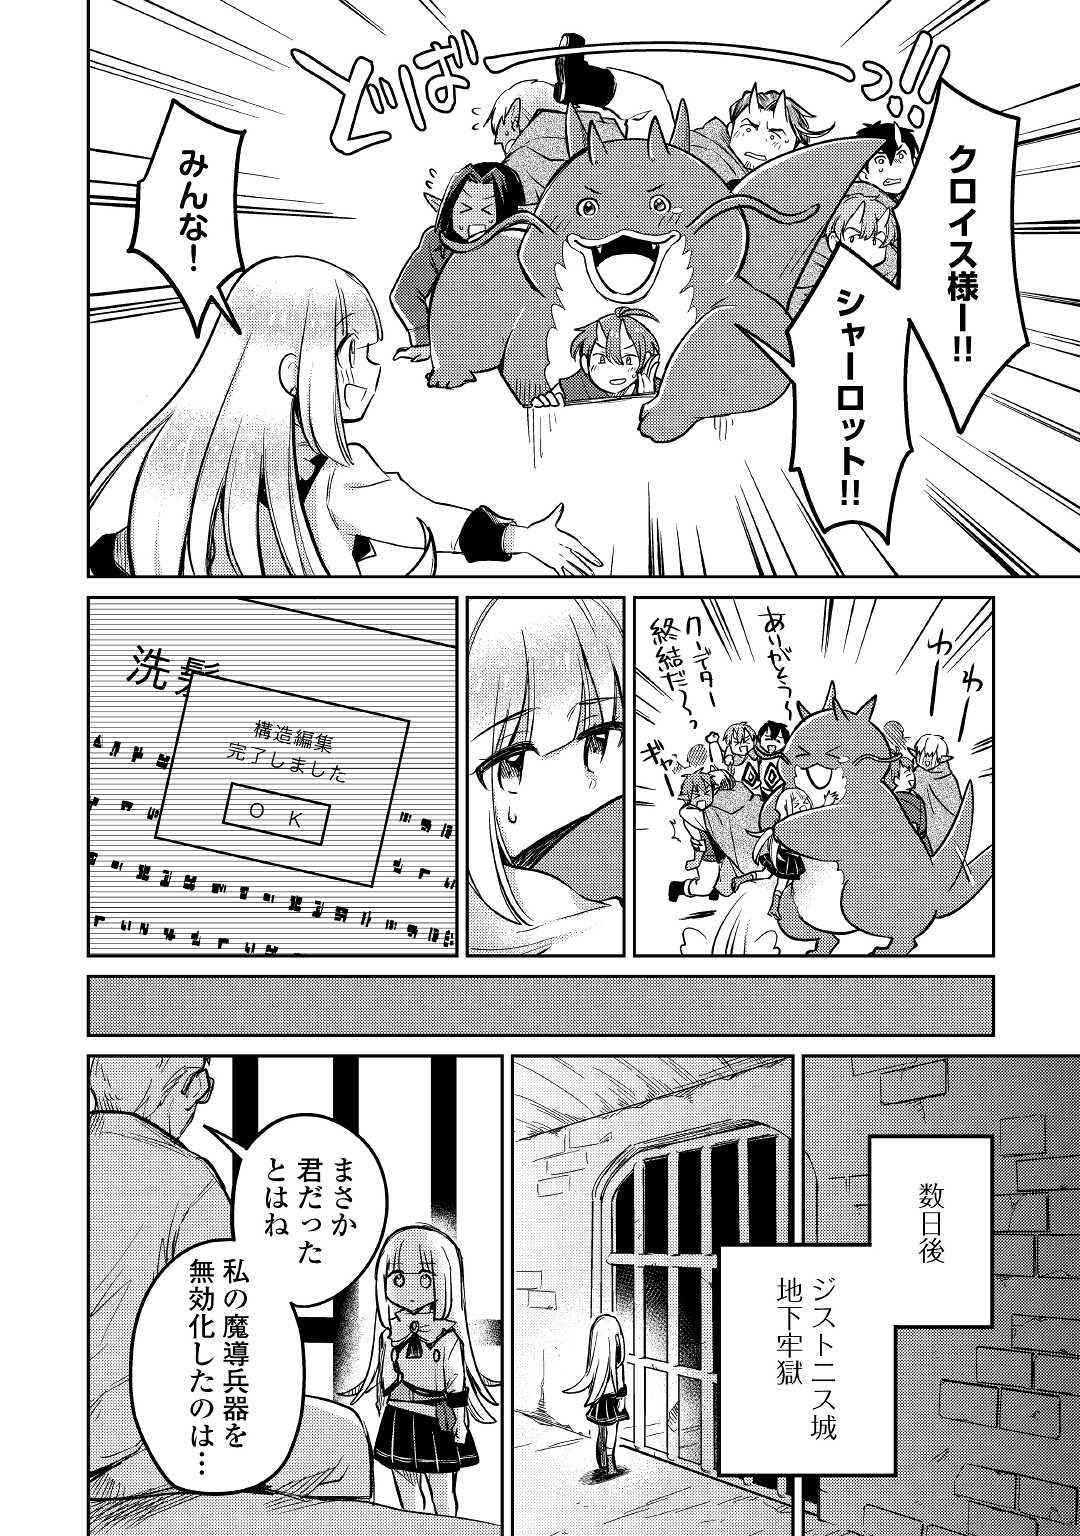 The Former Structural Researcher’s Story of Otherworldly Adventure 第40話 - Page 22